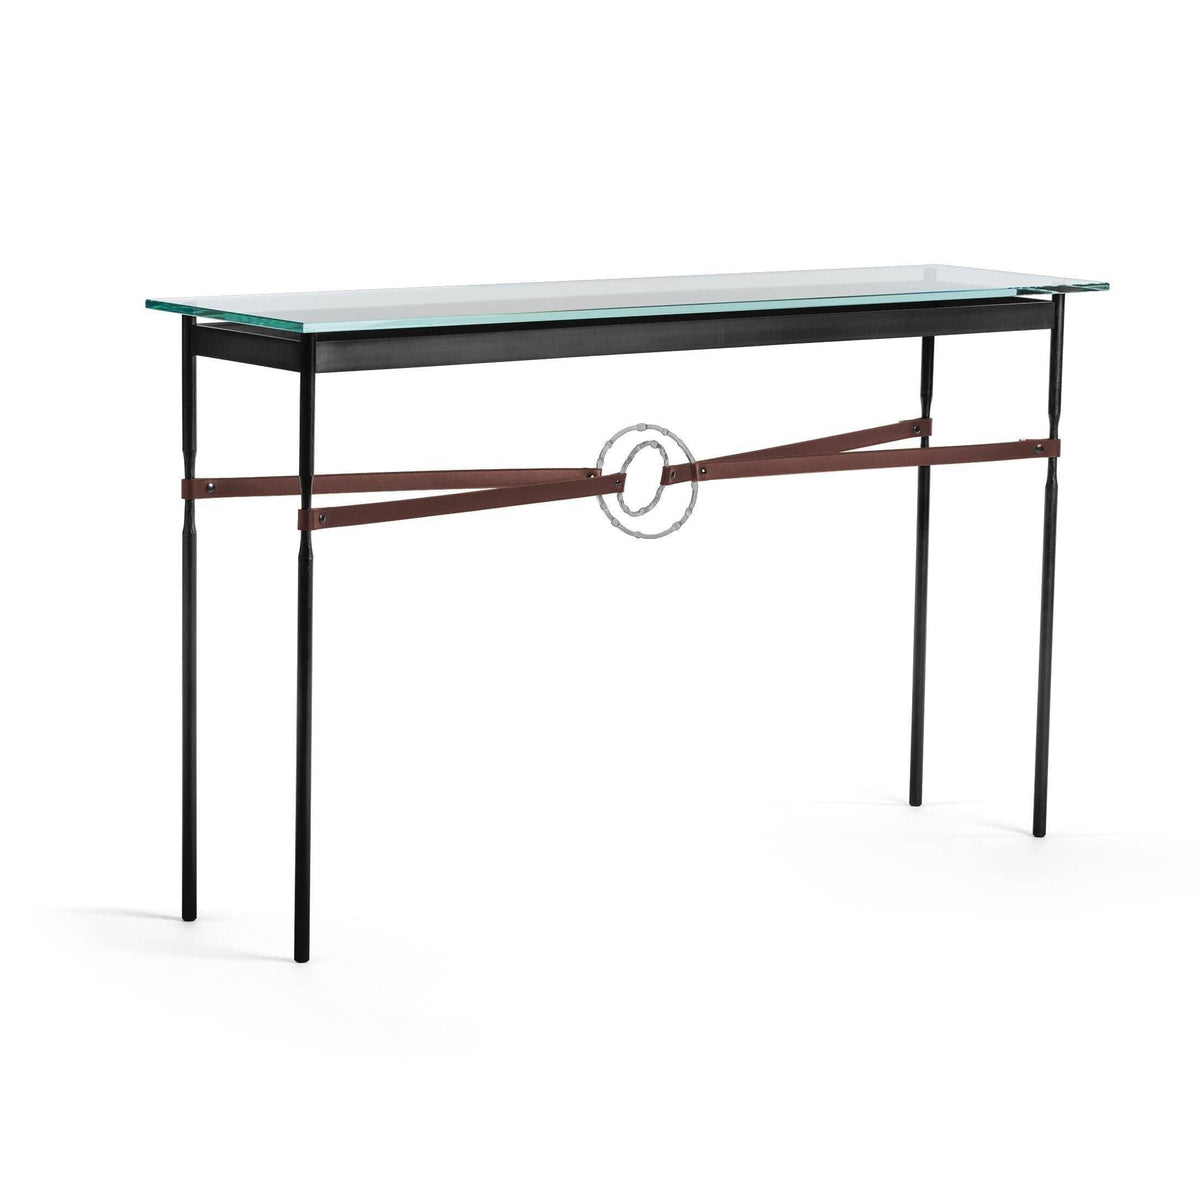 Hubbardton Forge - Equus Brown Leather Console Table - 750118-10-82-LB-VA0714 | Montreal Lighting & Hardware